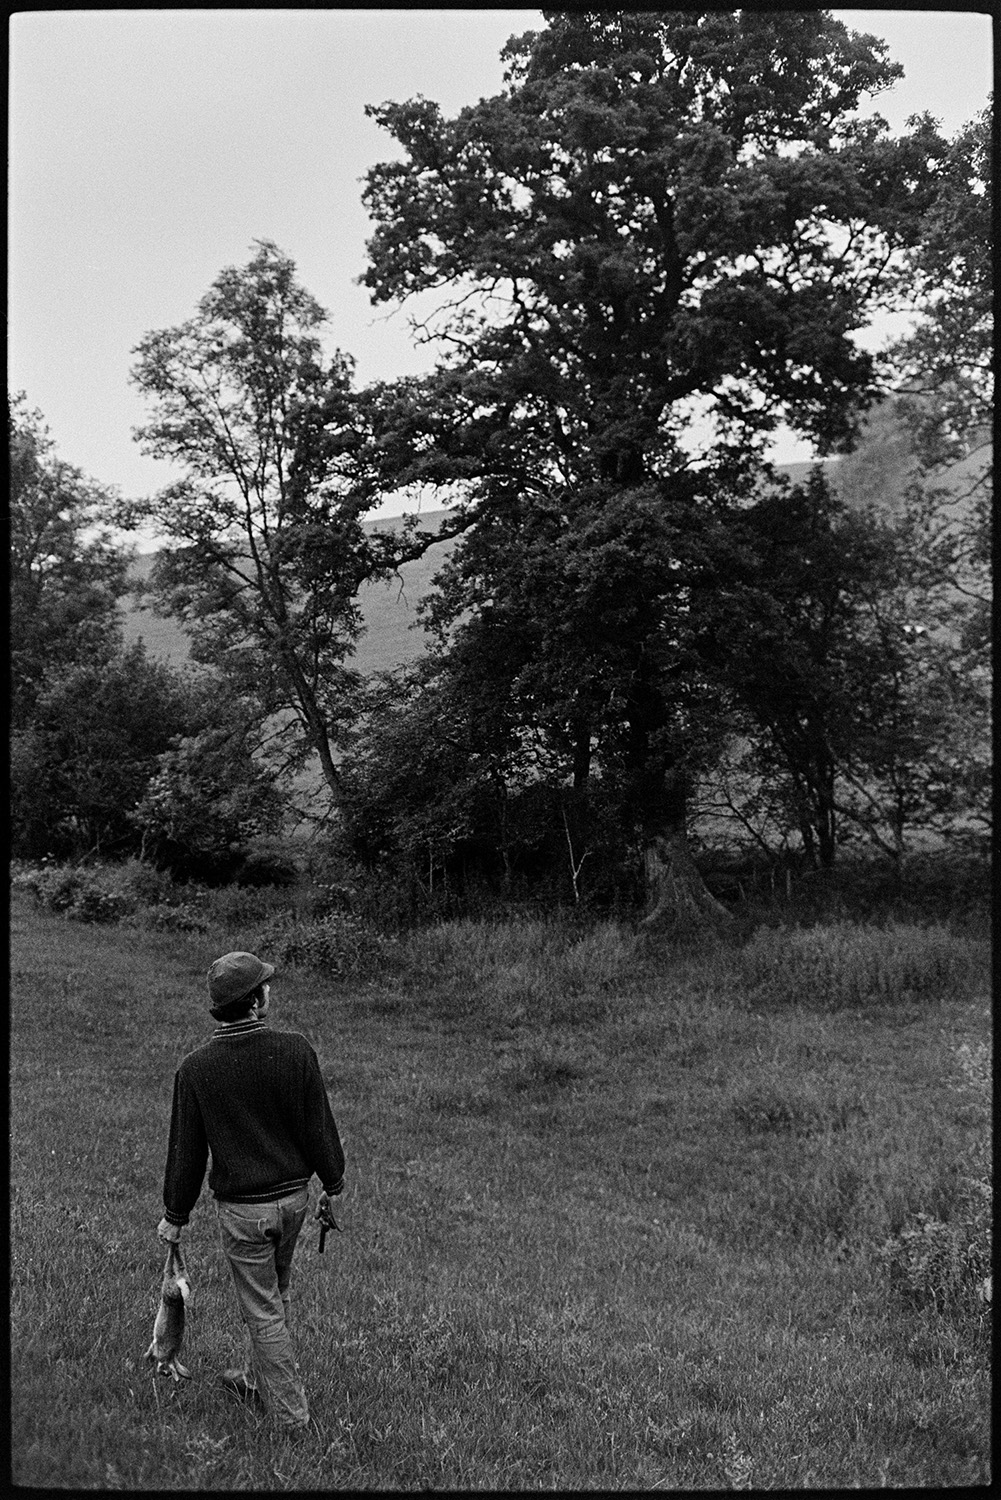 Farmer shooting squirrels. Shotgun. 
[David Ward walking past trees in a field at Parsonage, Iddesleigh looking for rabbits and squirrels to shoot. He is holding a shotgun and carrying a dead rabbit.]